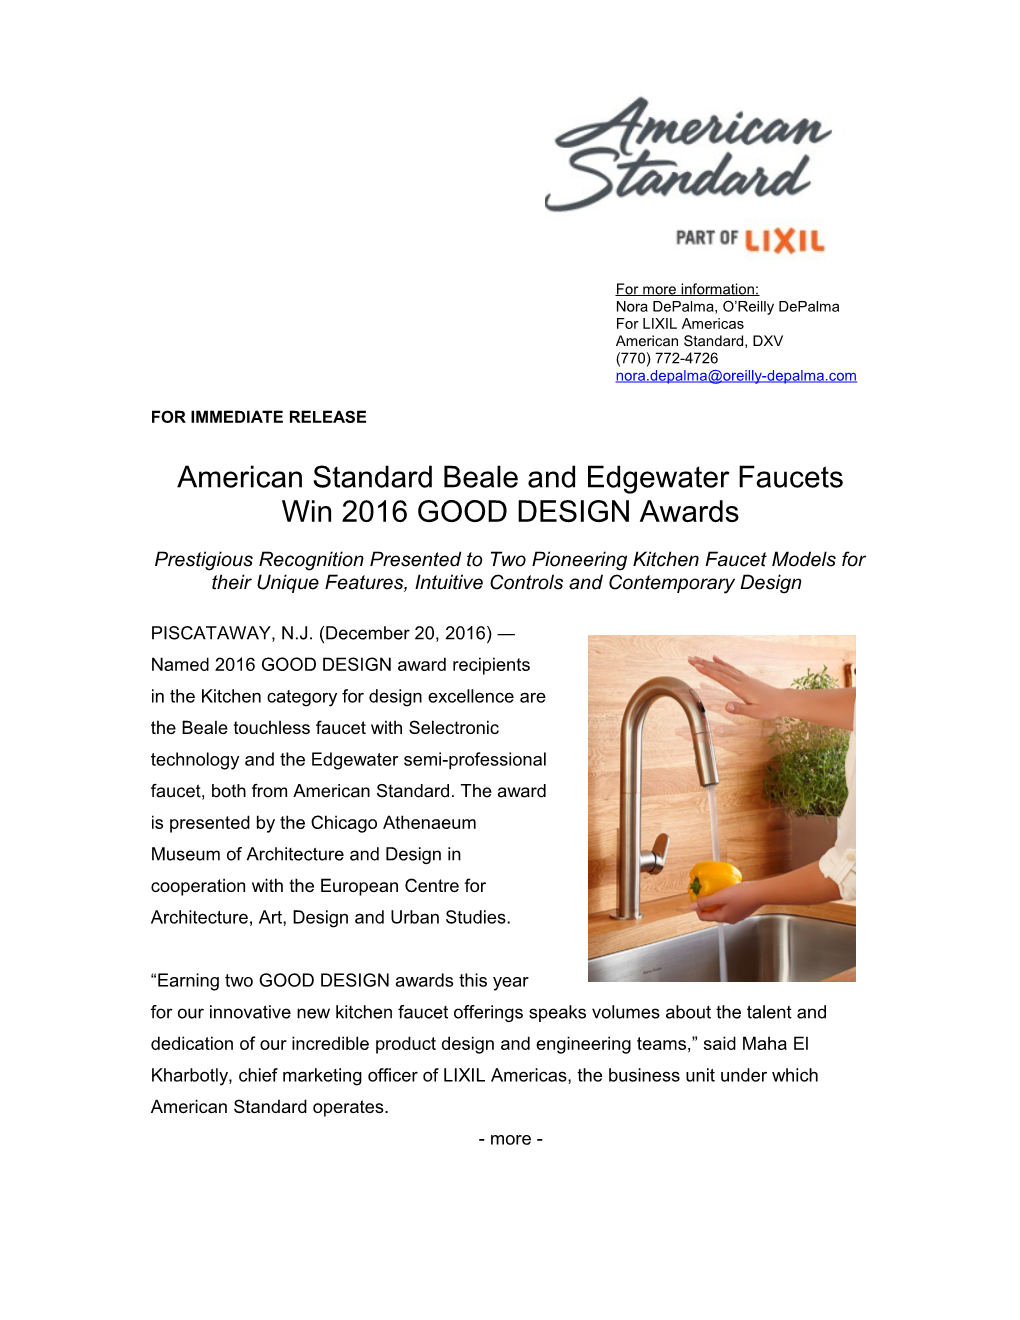 American Standard Beale and Edgewater Faucets Win 2016 GOOD DESIGN Awards 2-2-2